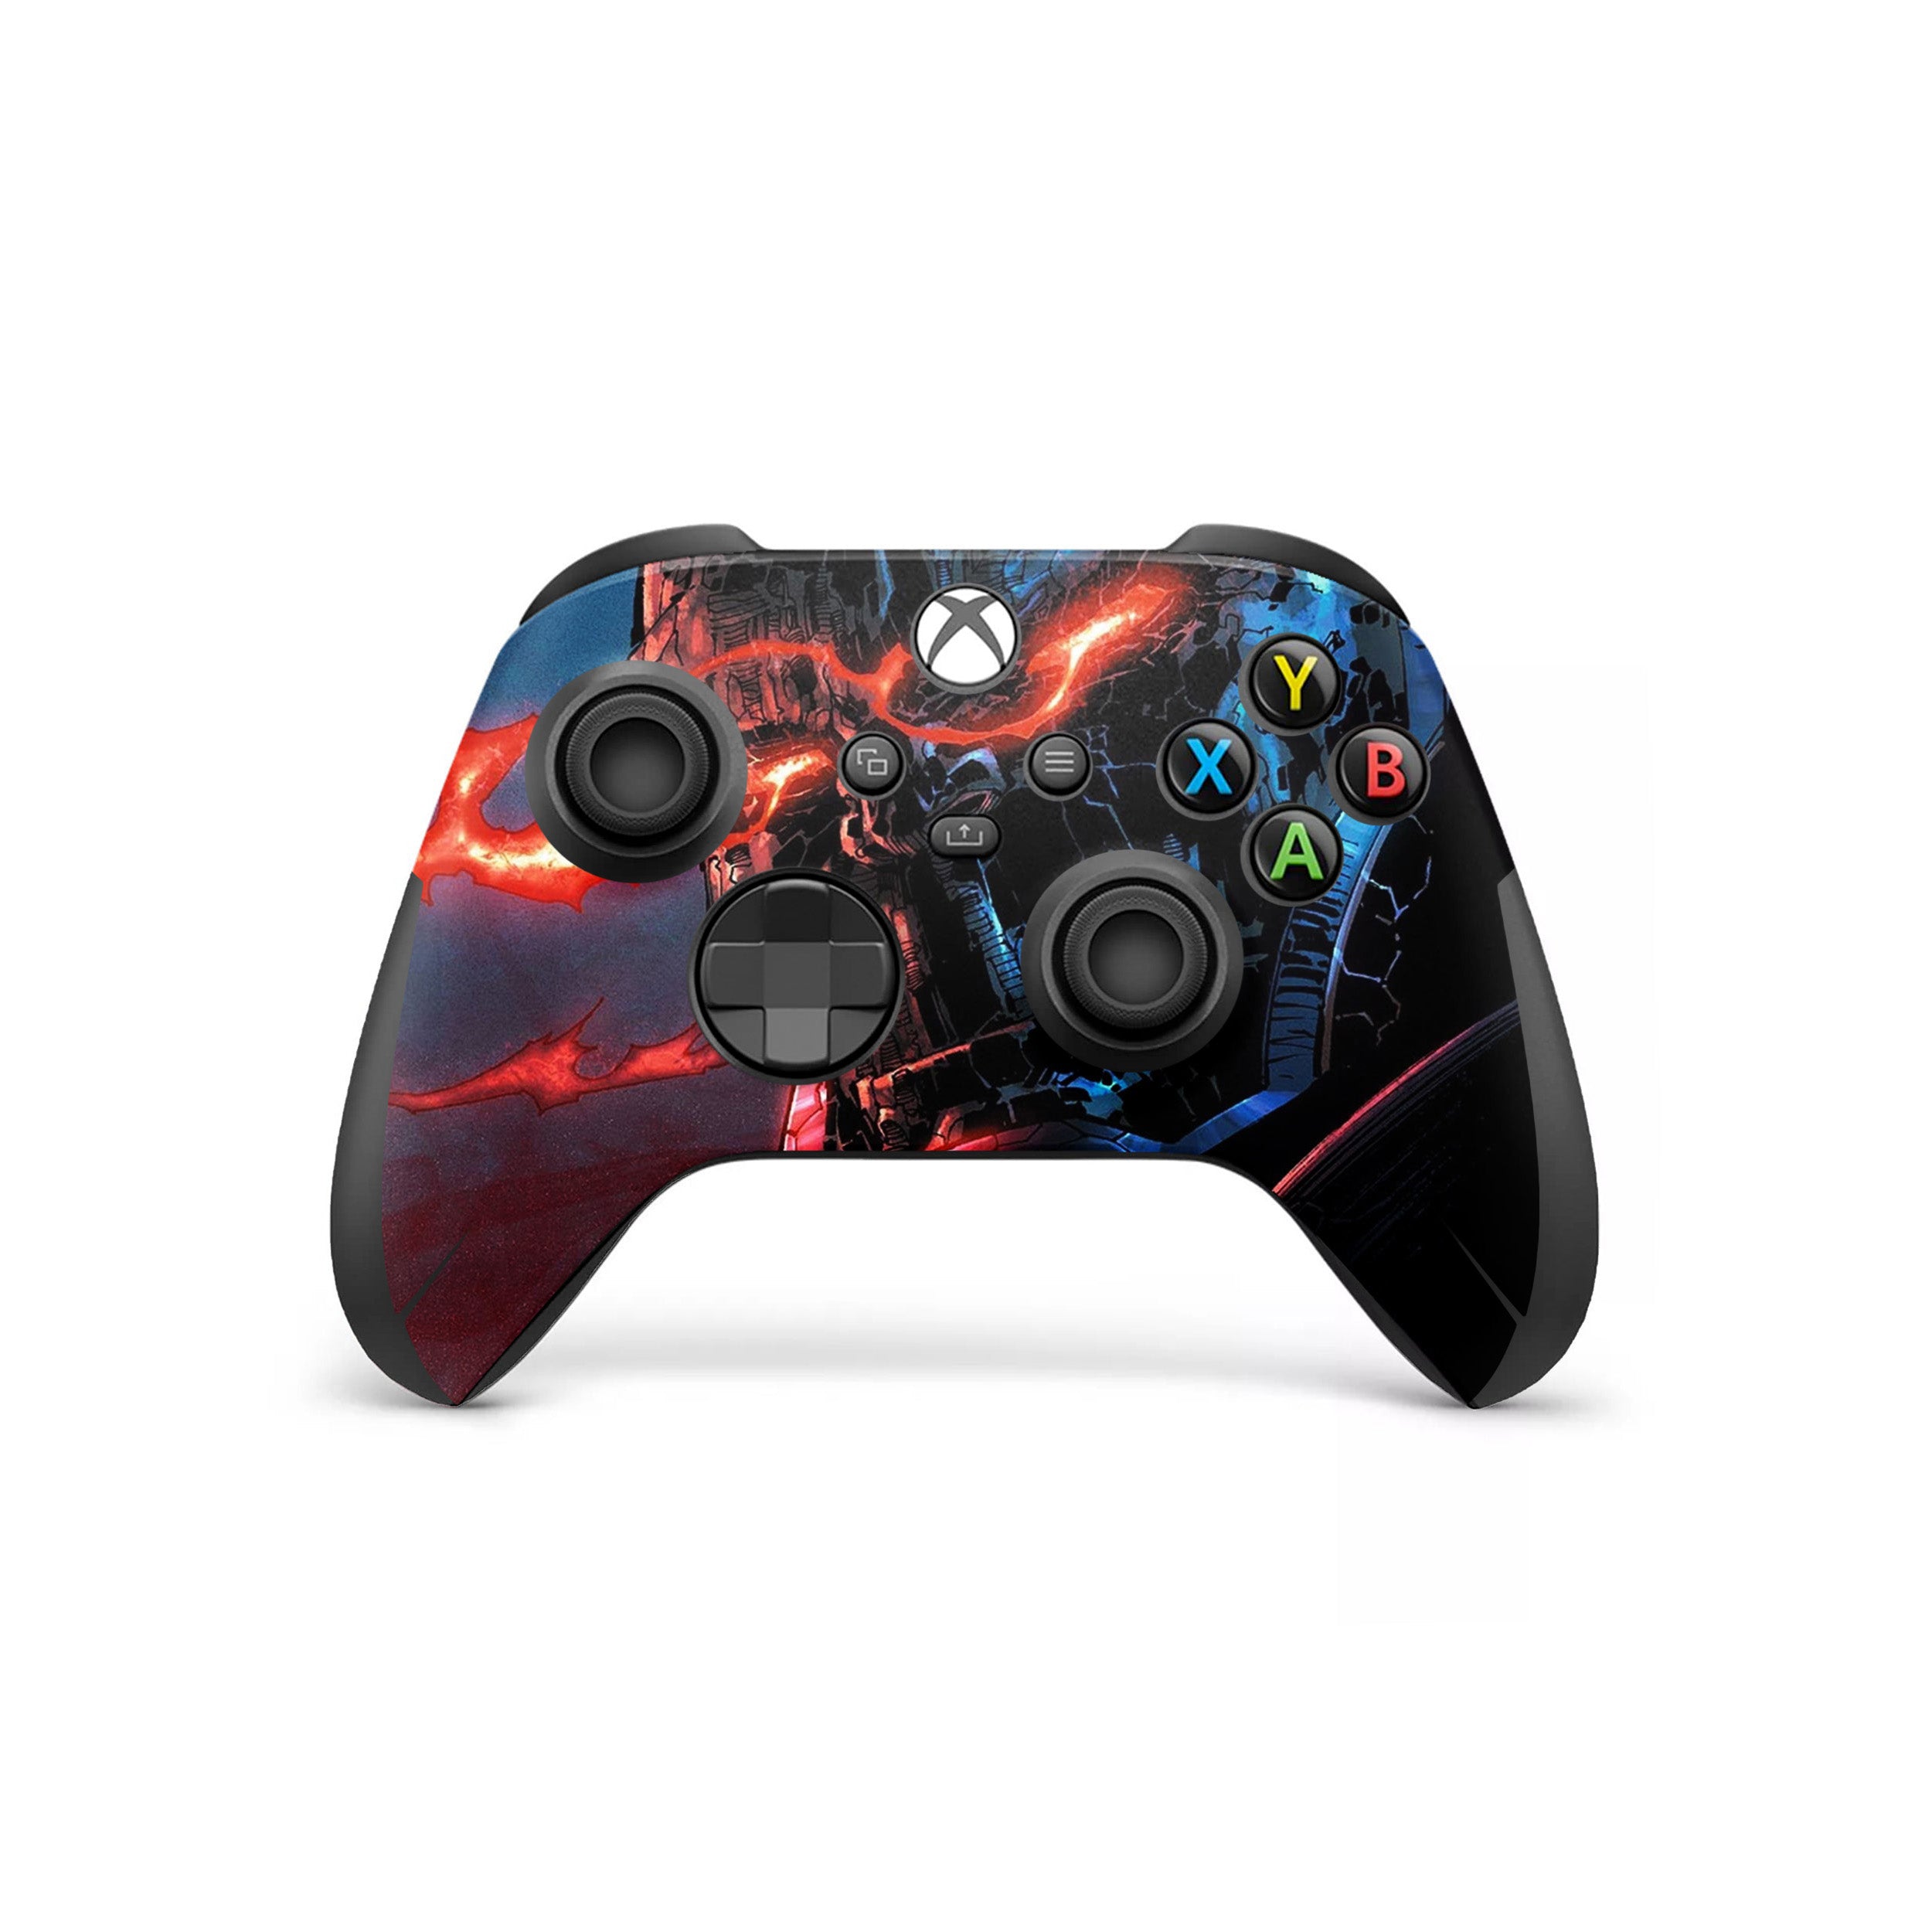 A video game skin featuring a DC Darkseid design for the Xbox Wireless Controller.